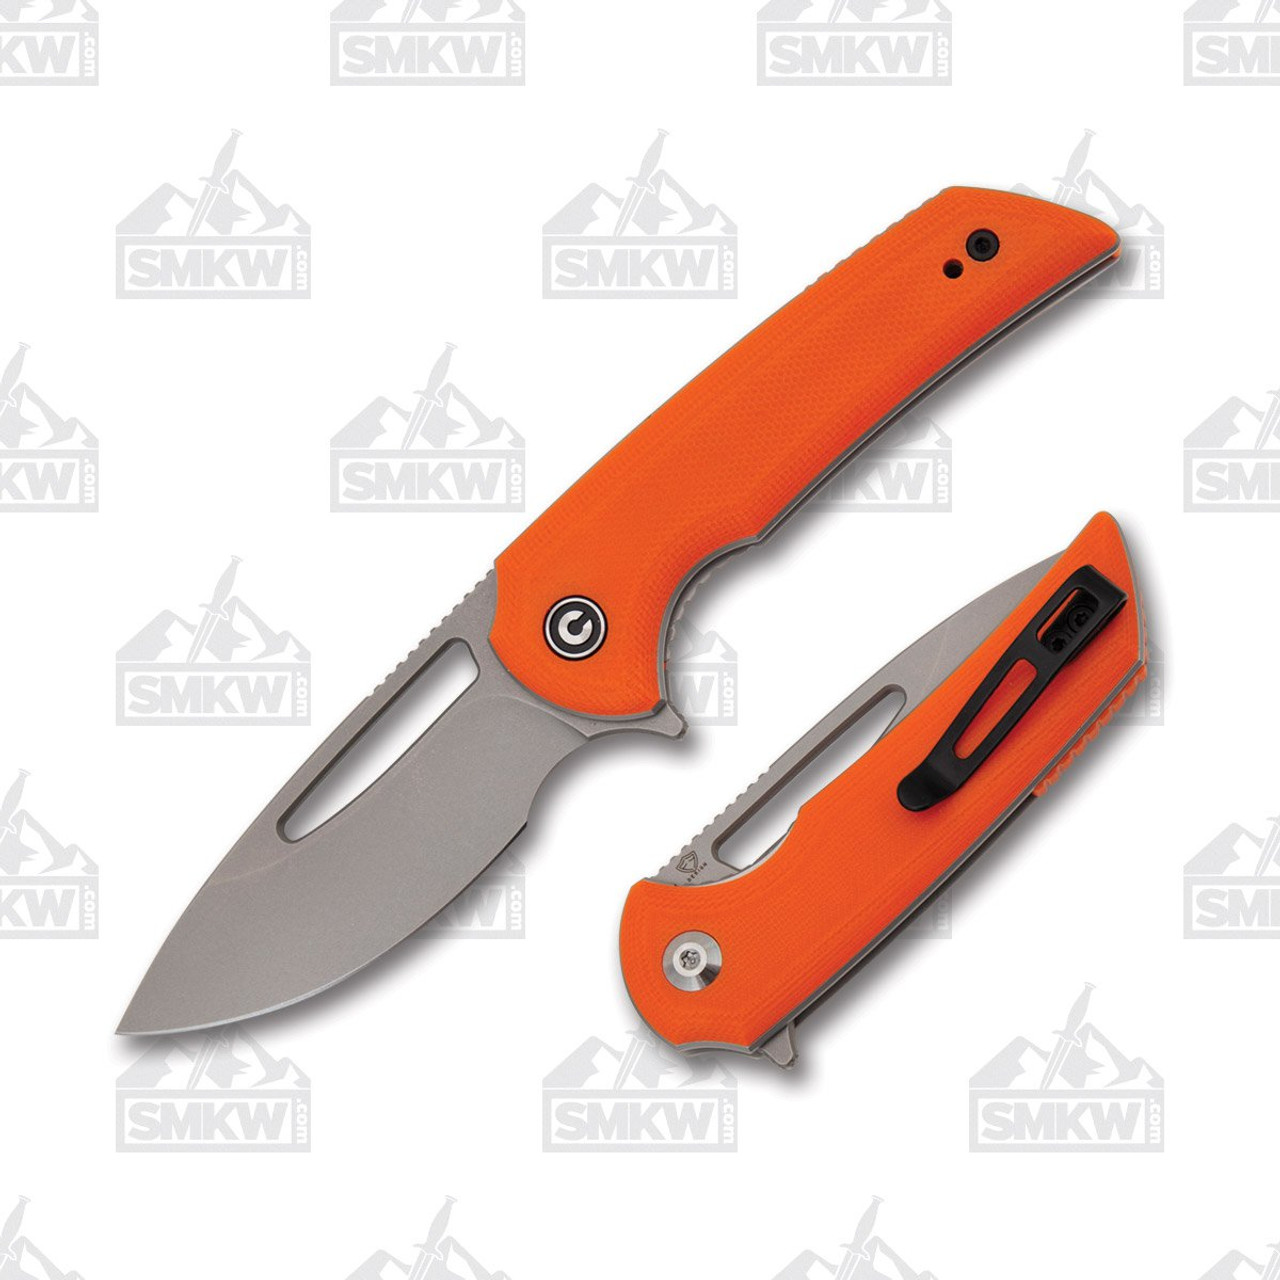 Great deal on a GREAT BUDGET KNIFE! $44 for the CIVIVI Odium